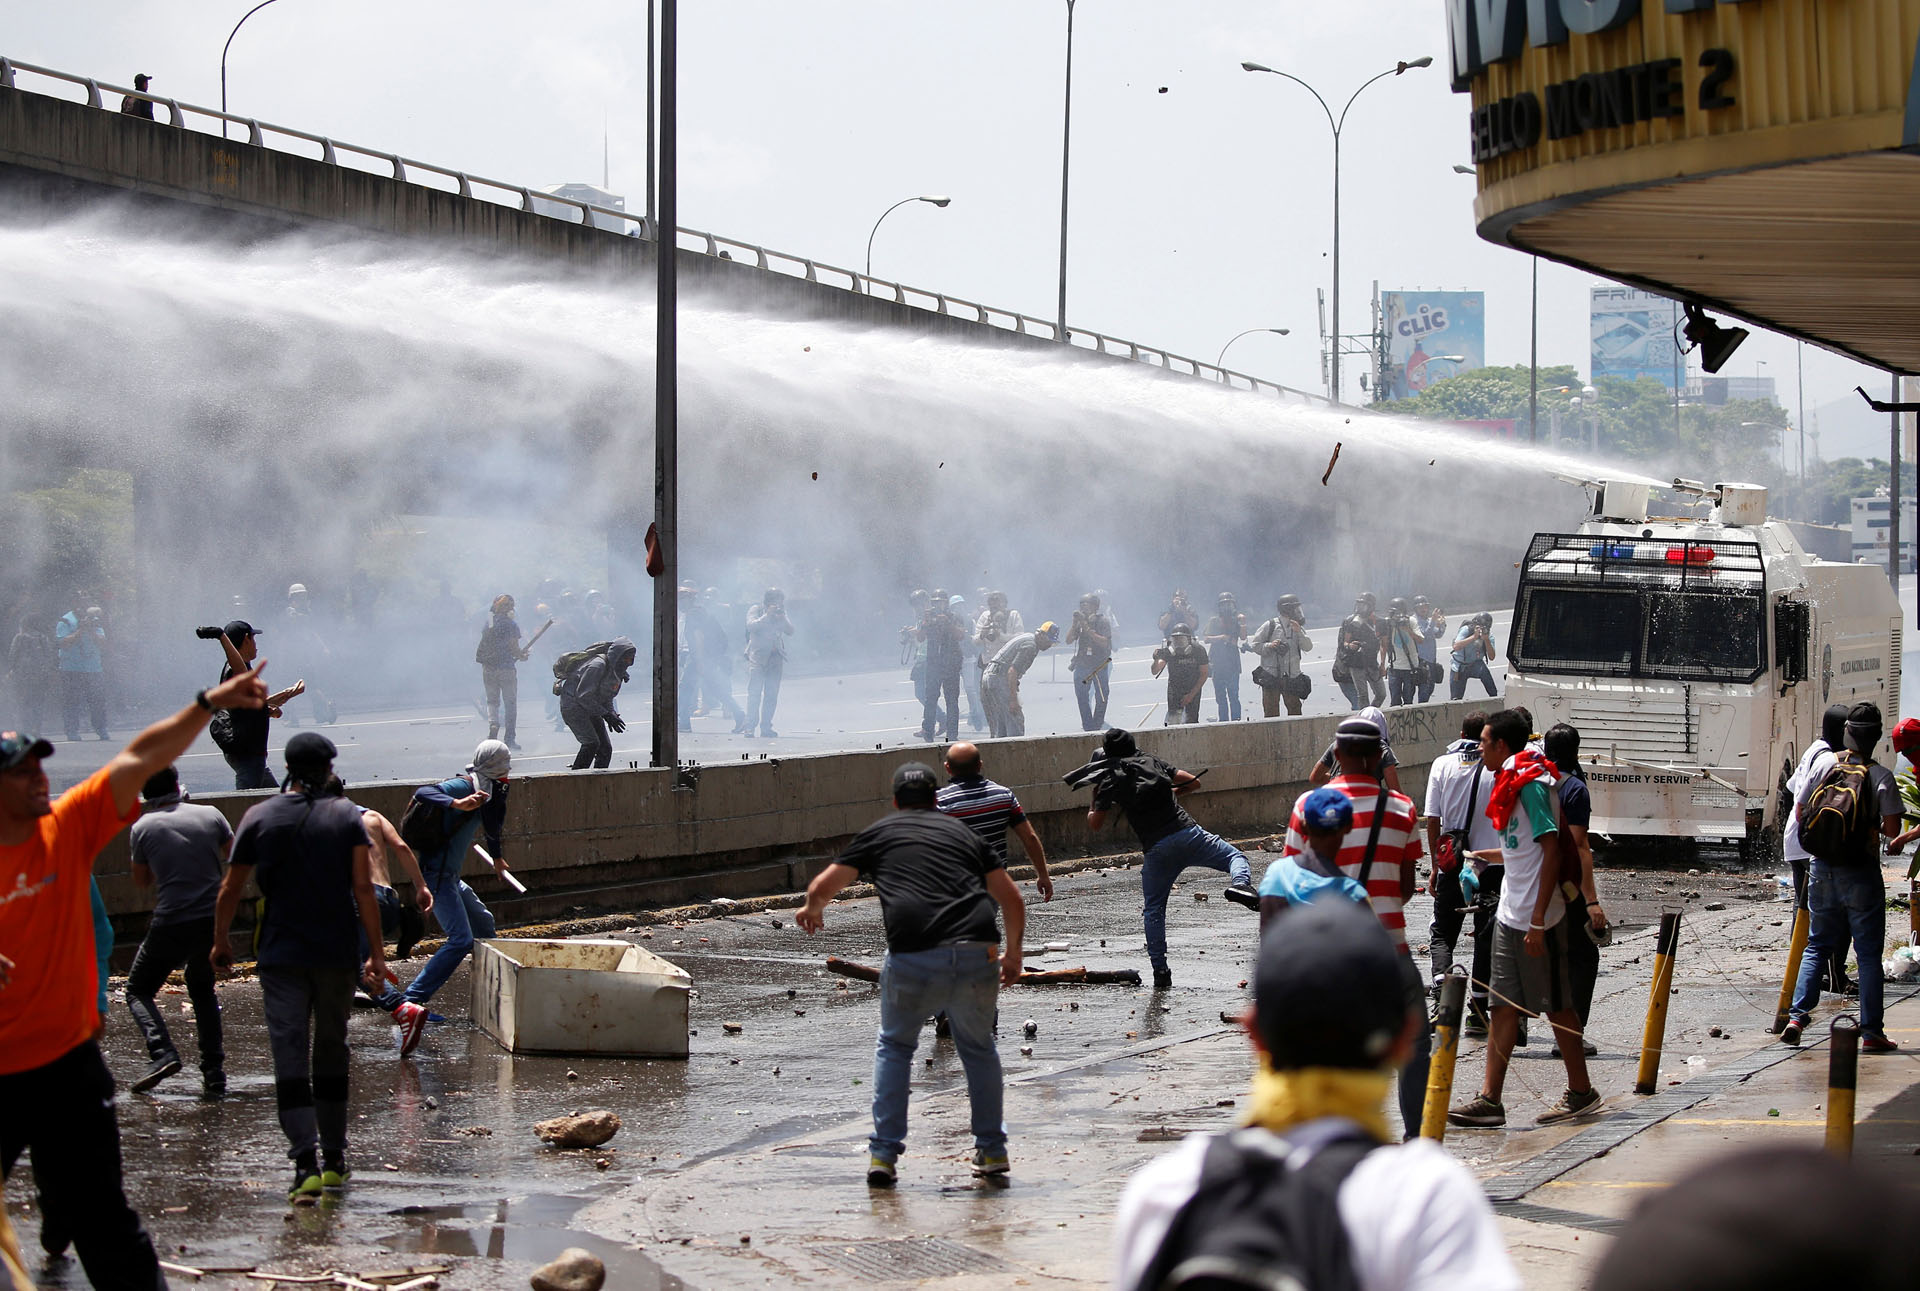 Police use a water cannon to disperse demonstrators during an opposition rally in Caracas, Venezuela April 6, 2017. REUTERS/Carlos Garcia Rawlins